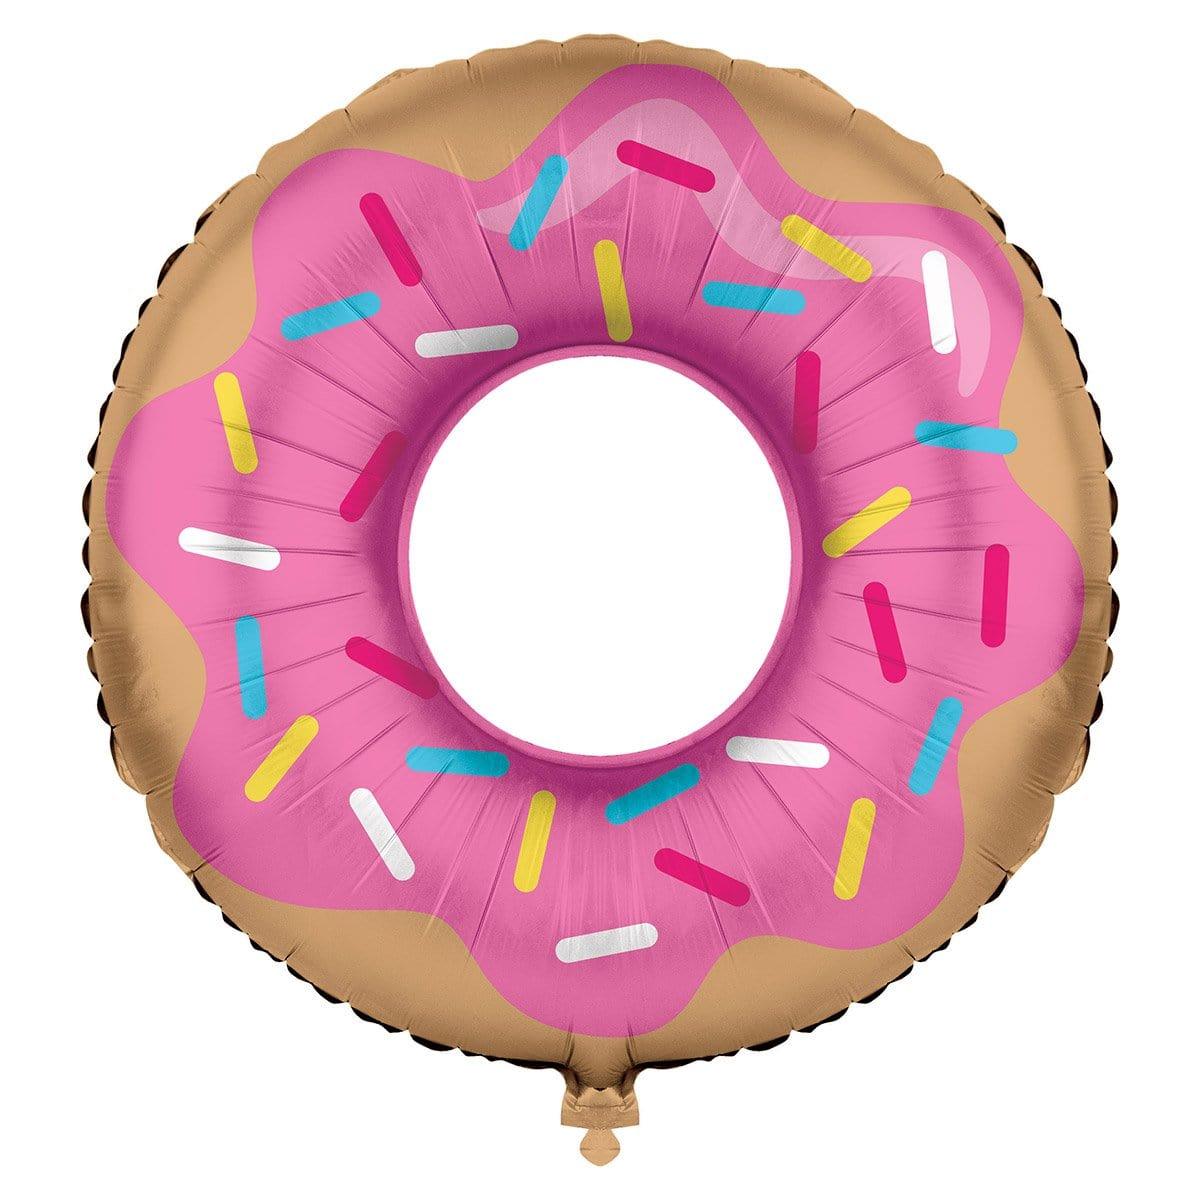 Buy Balloons Donut Time Foil Balloon, 18 Inches sold at Party Expert